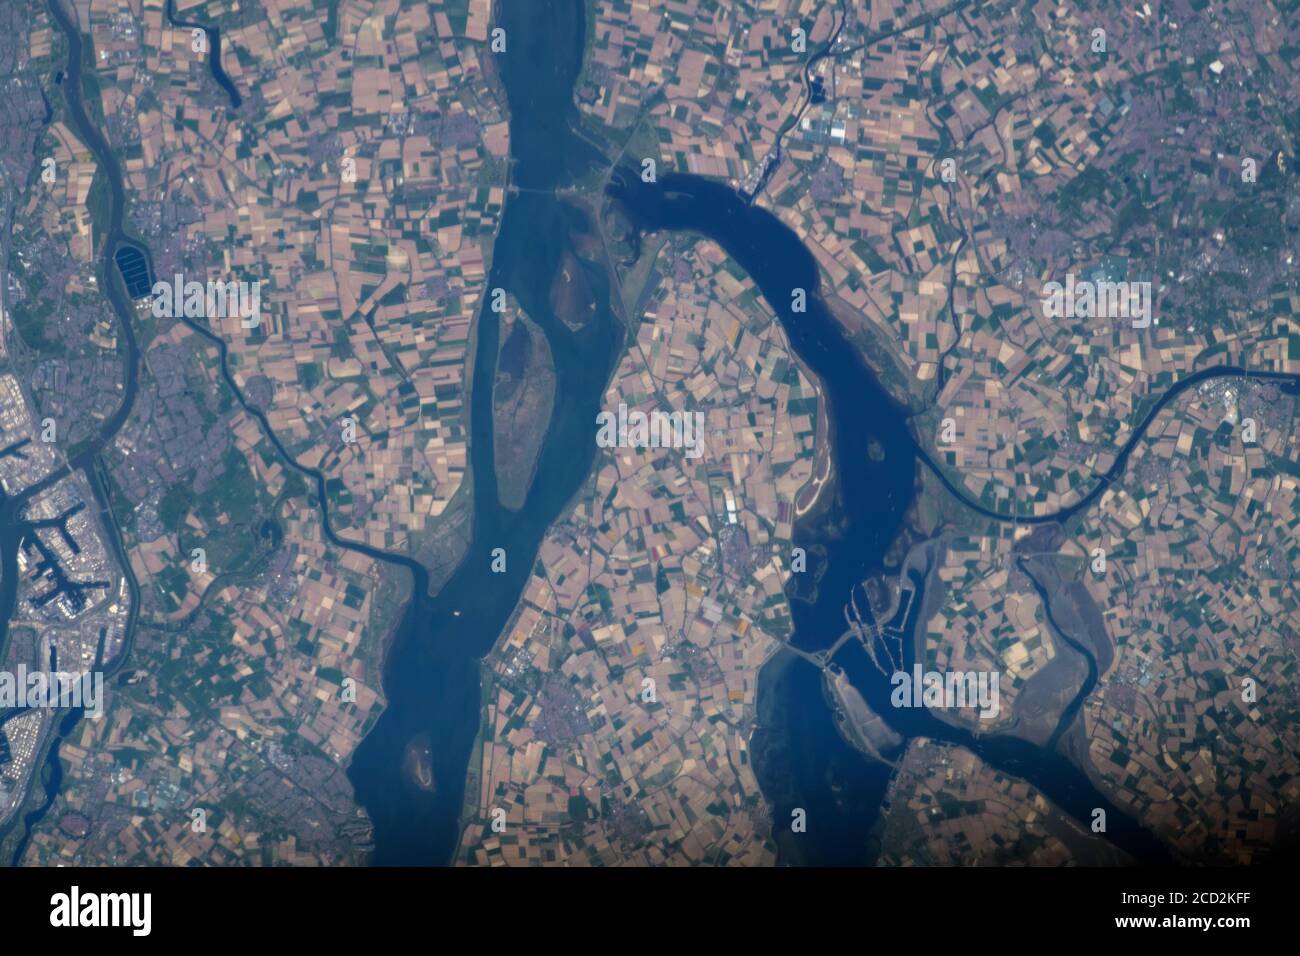 THE NETHERLANDS - 23 April 2020 - The Rhine–Meuse–Scheldt delta, a river delta in the Netherlands, is pictured from the International Space Station - Stock Photo